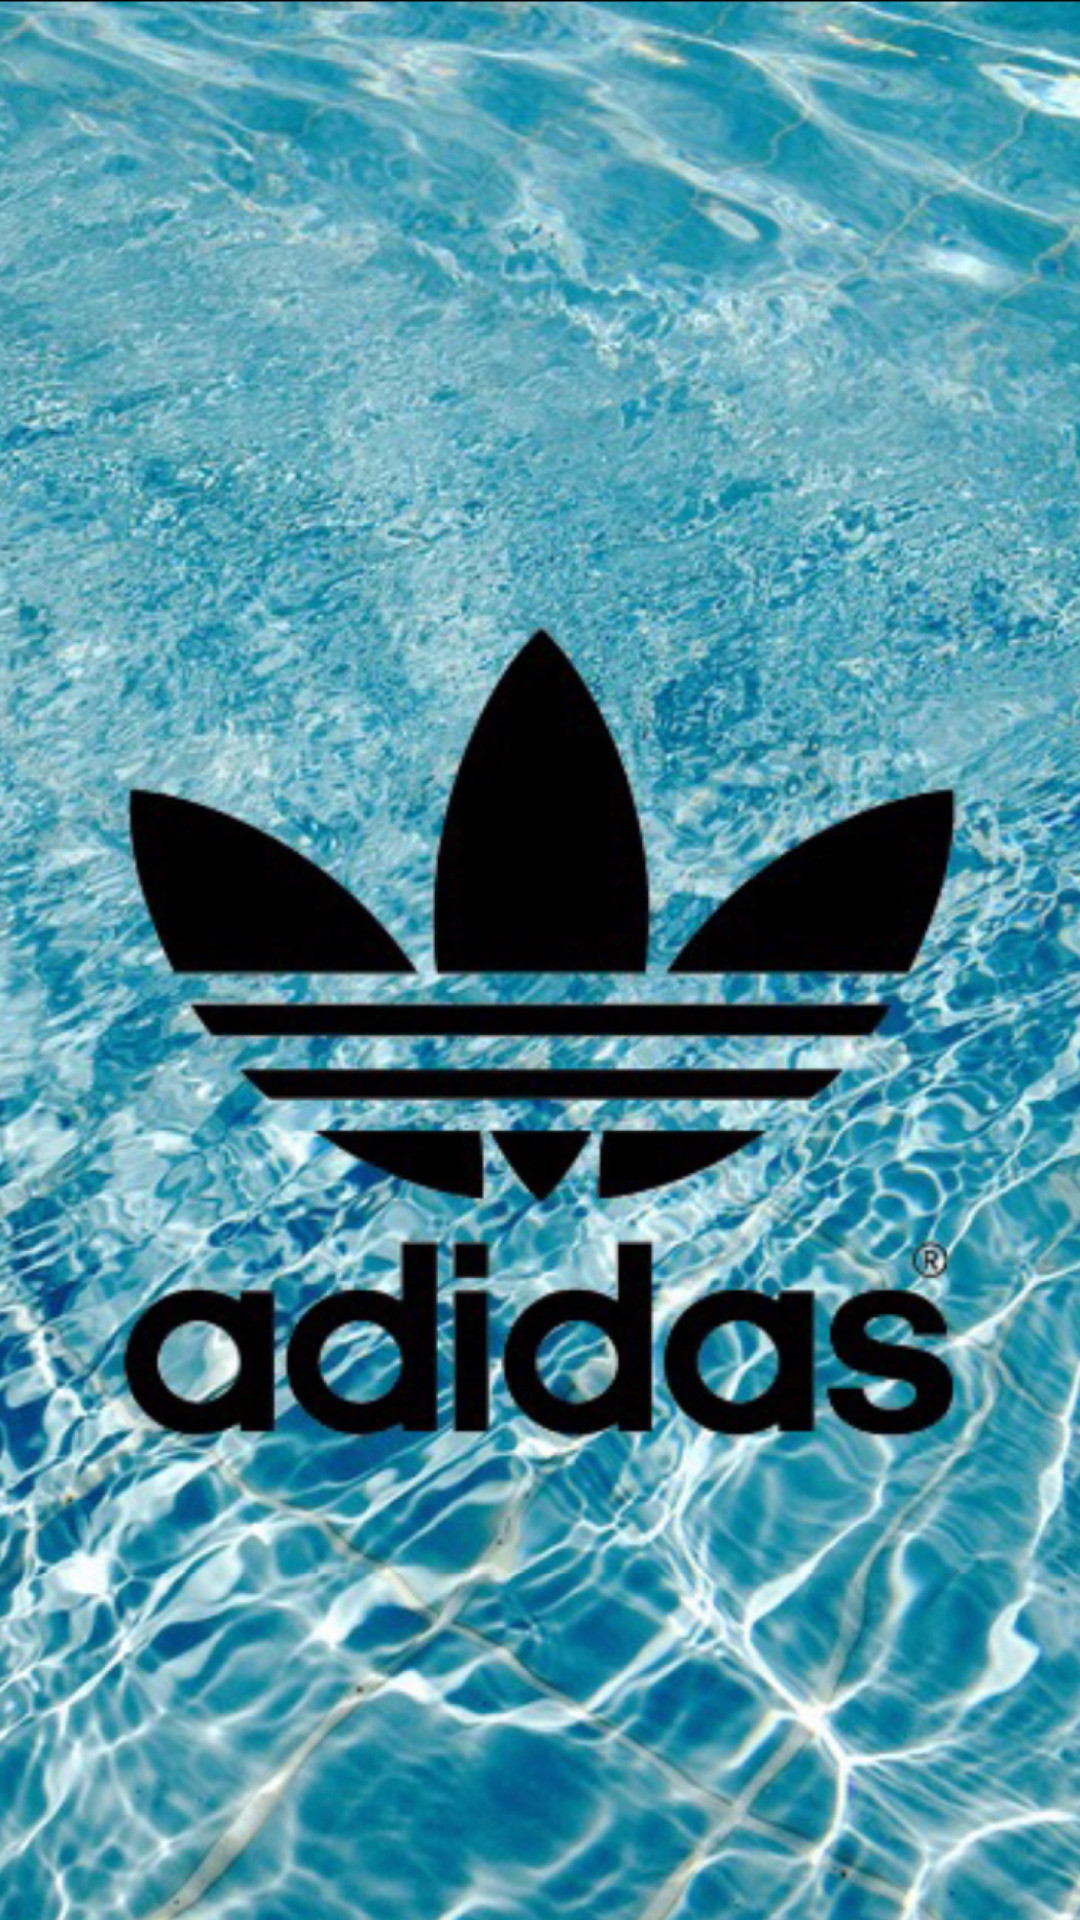 1080x1920 adidas iphone hd background hd wallpapers desktop images download free  windows wallpapers amazing colourful 4k picture 1080Ã1920 Wallpaper HD